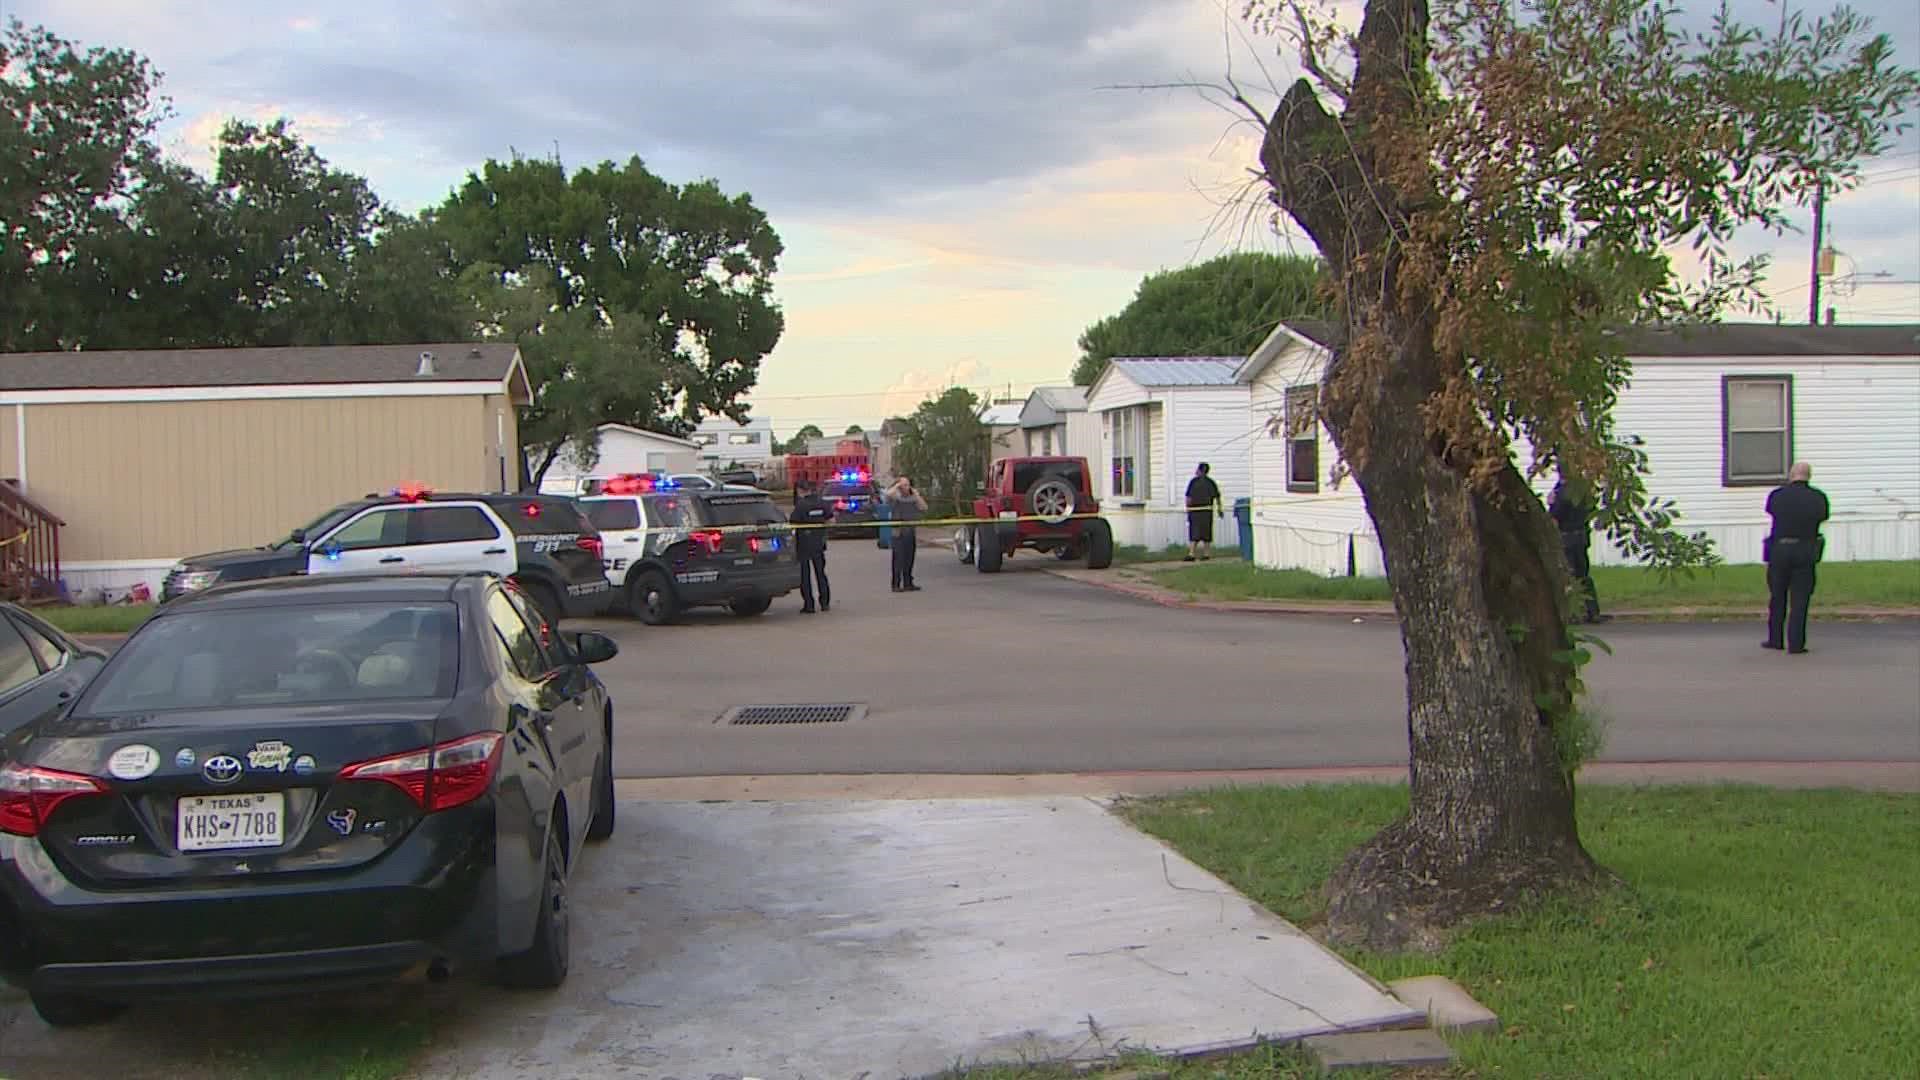 Four people were shot Sunday at a mobile home park in southeast Houston, according to police.